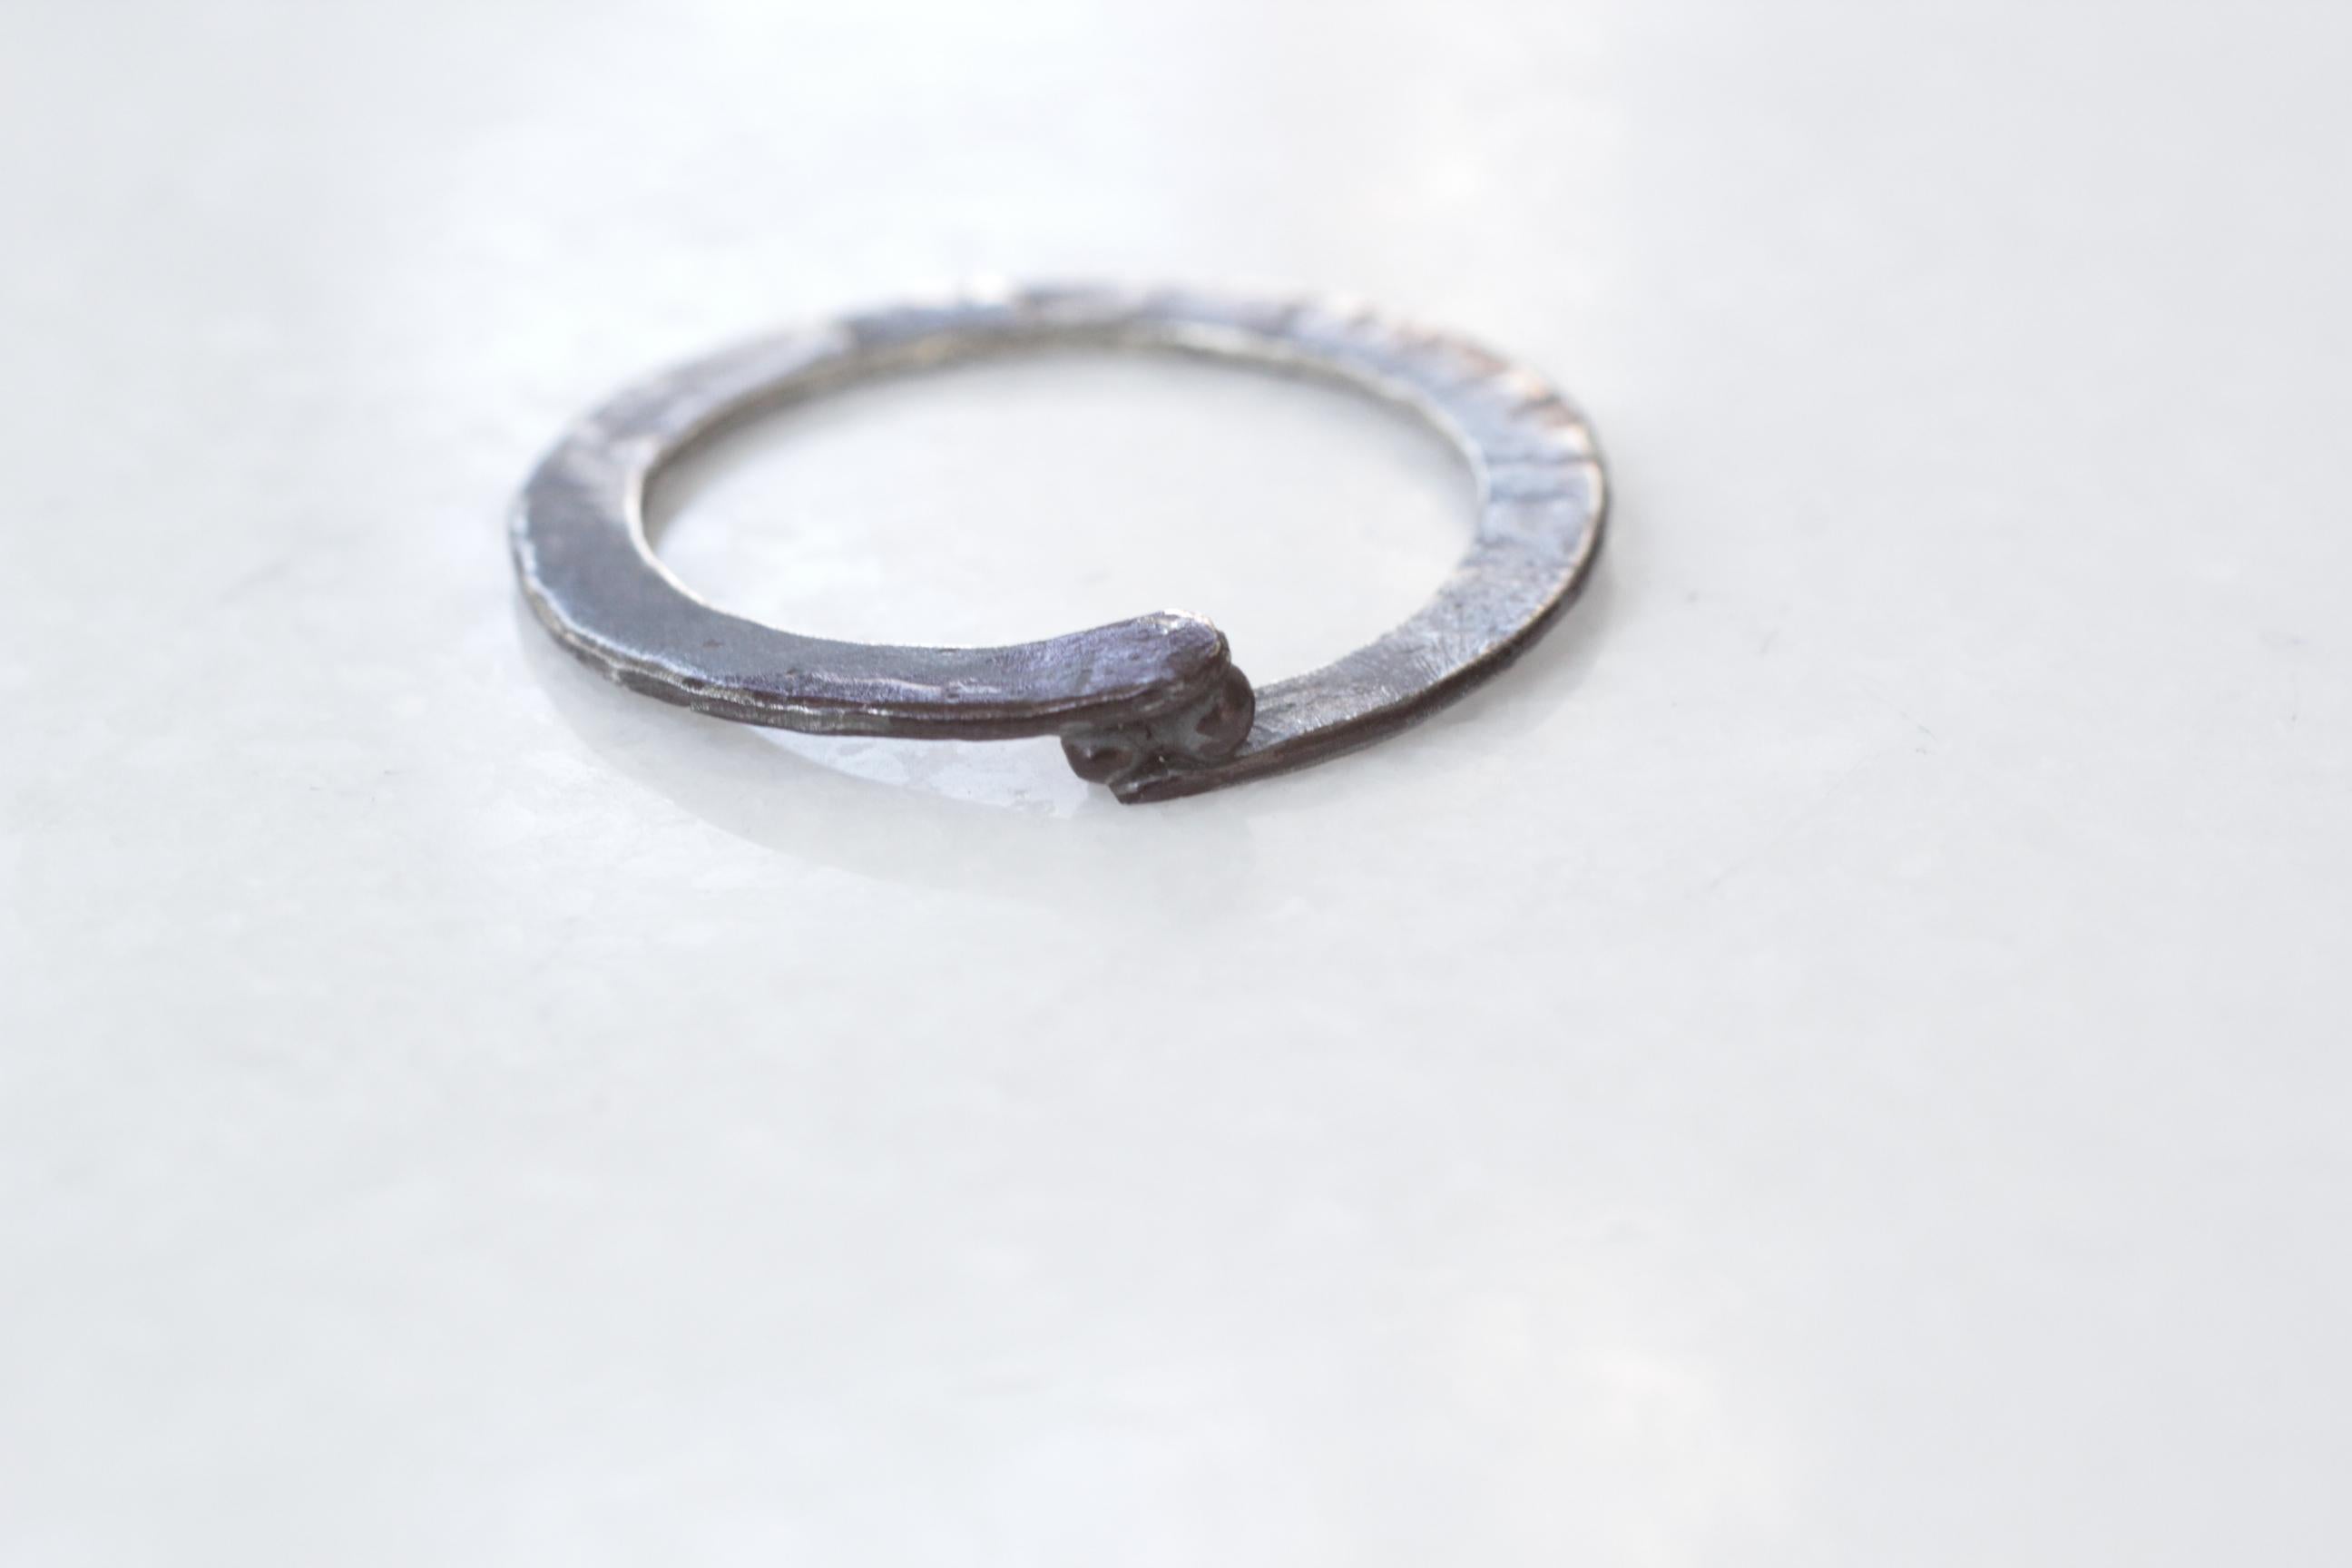 Simplicity With A Twist Holding Two Granules, contemporary design.
This listing is for a fashion ring in oxidized or blackened sterling silver, measuring 1mm wide by 3mm thick.

Process: This striking ring is first hand forged in 21k gold, then cast